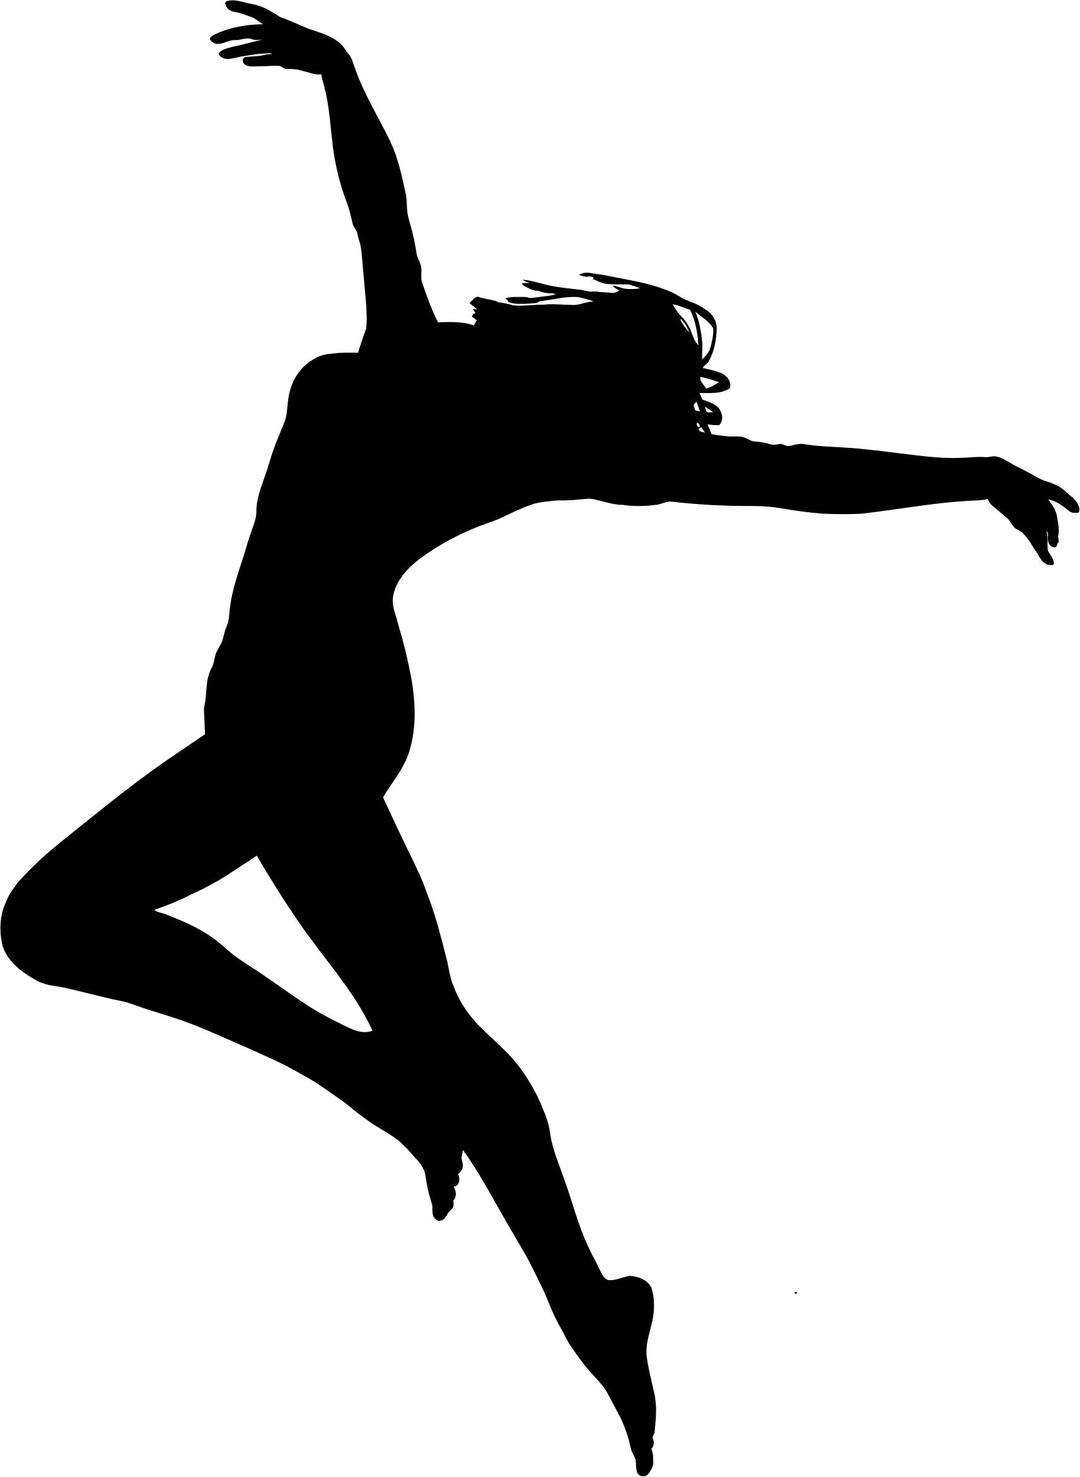 Carefree Dancing Woman Silhouette png transparent